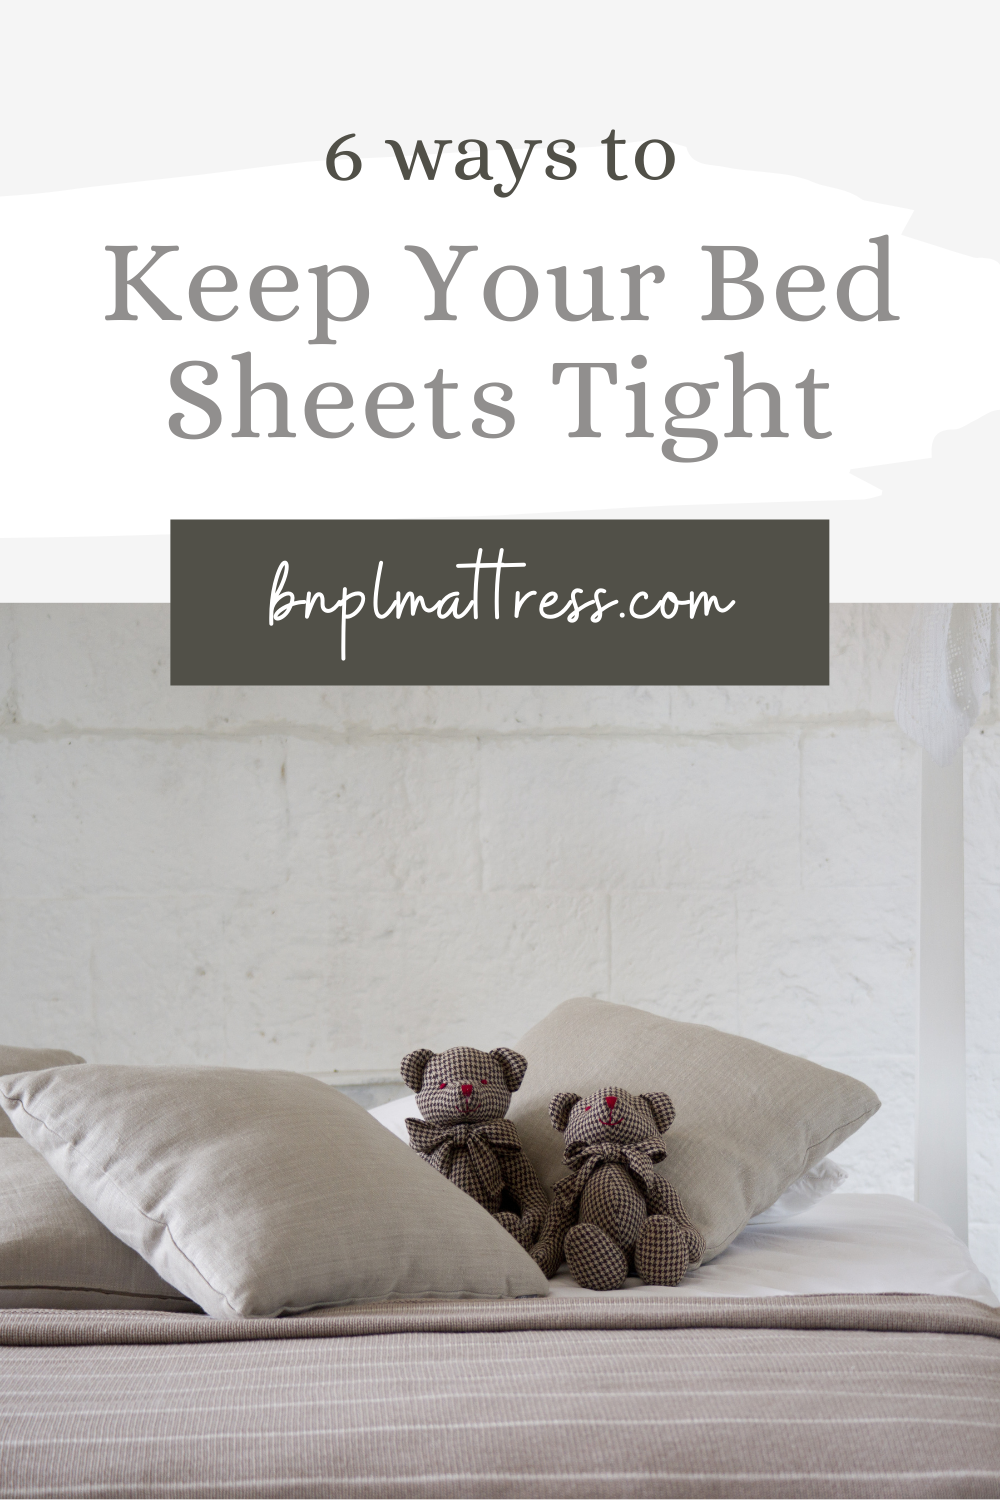 How To Keep Your Bed Sheets Tight